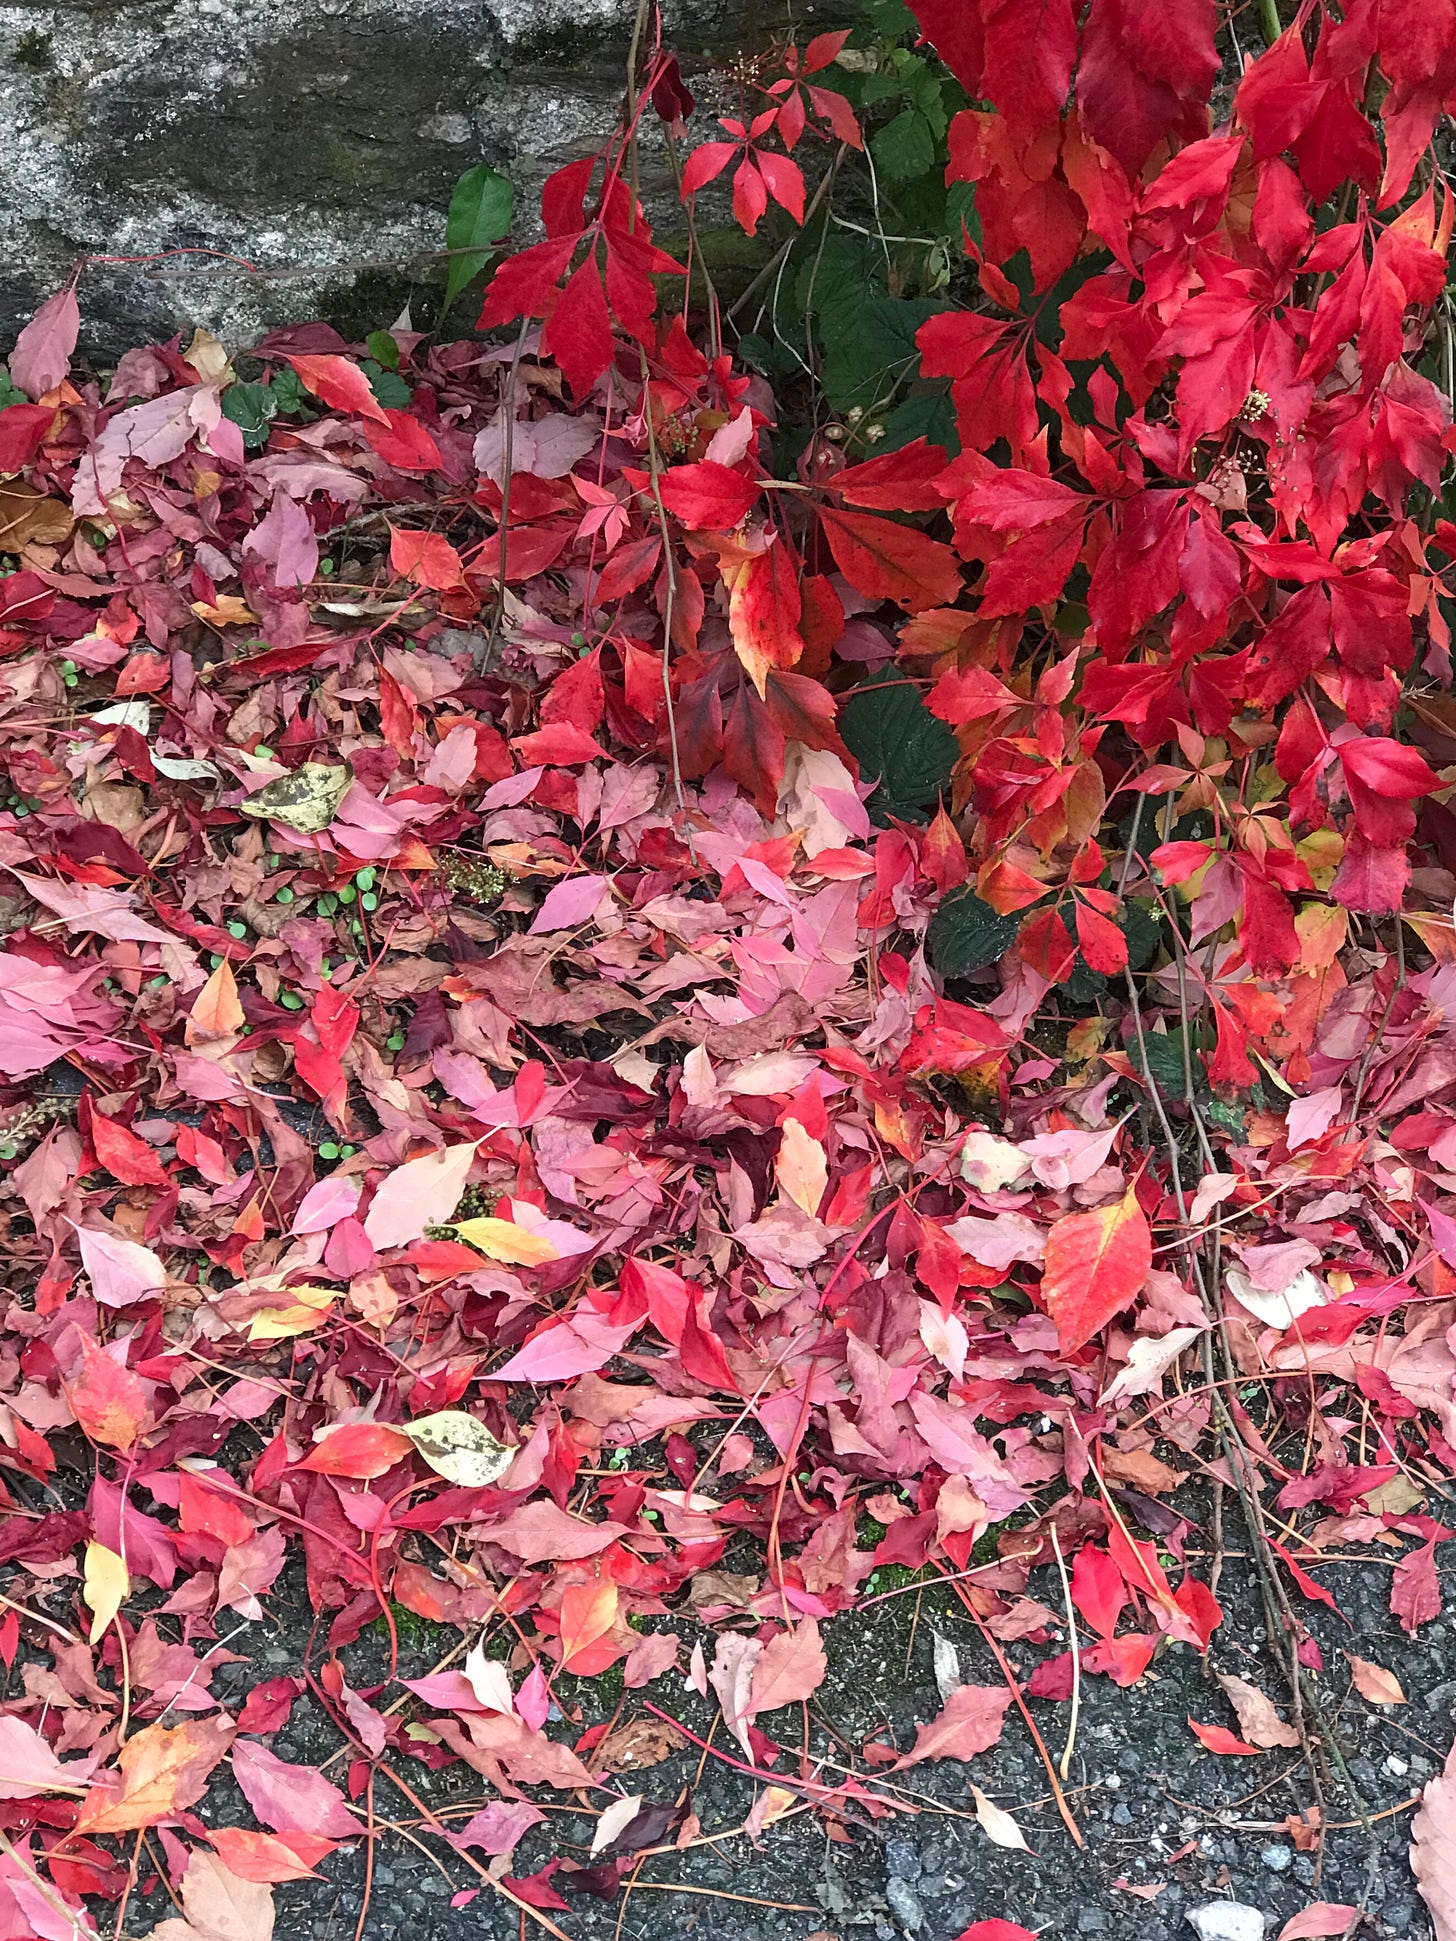 Bright red, pink and brown autumnal leaves, some fallen on the ground, some cascading from a tree